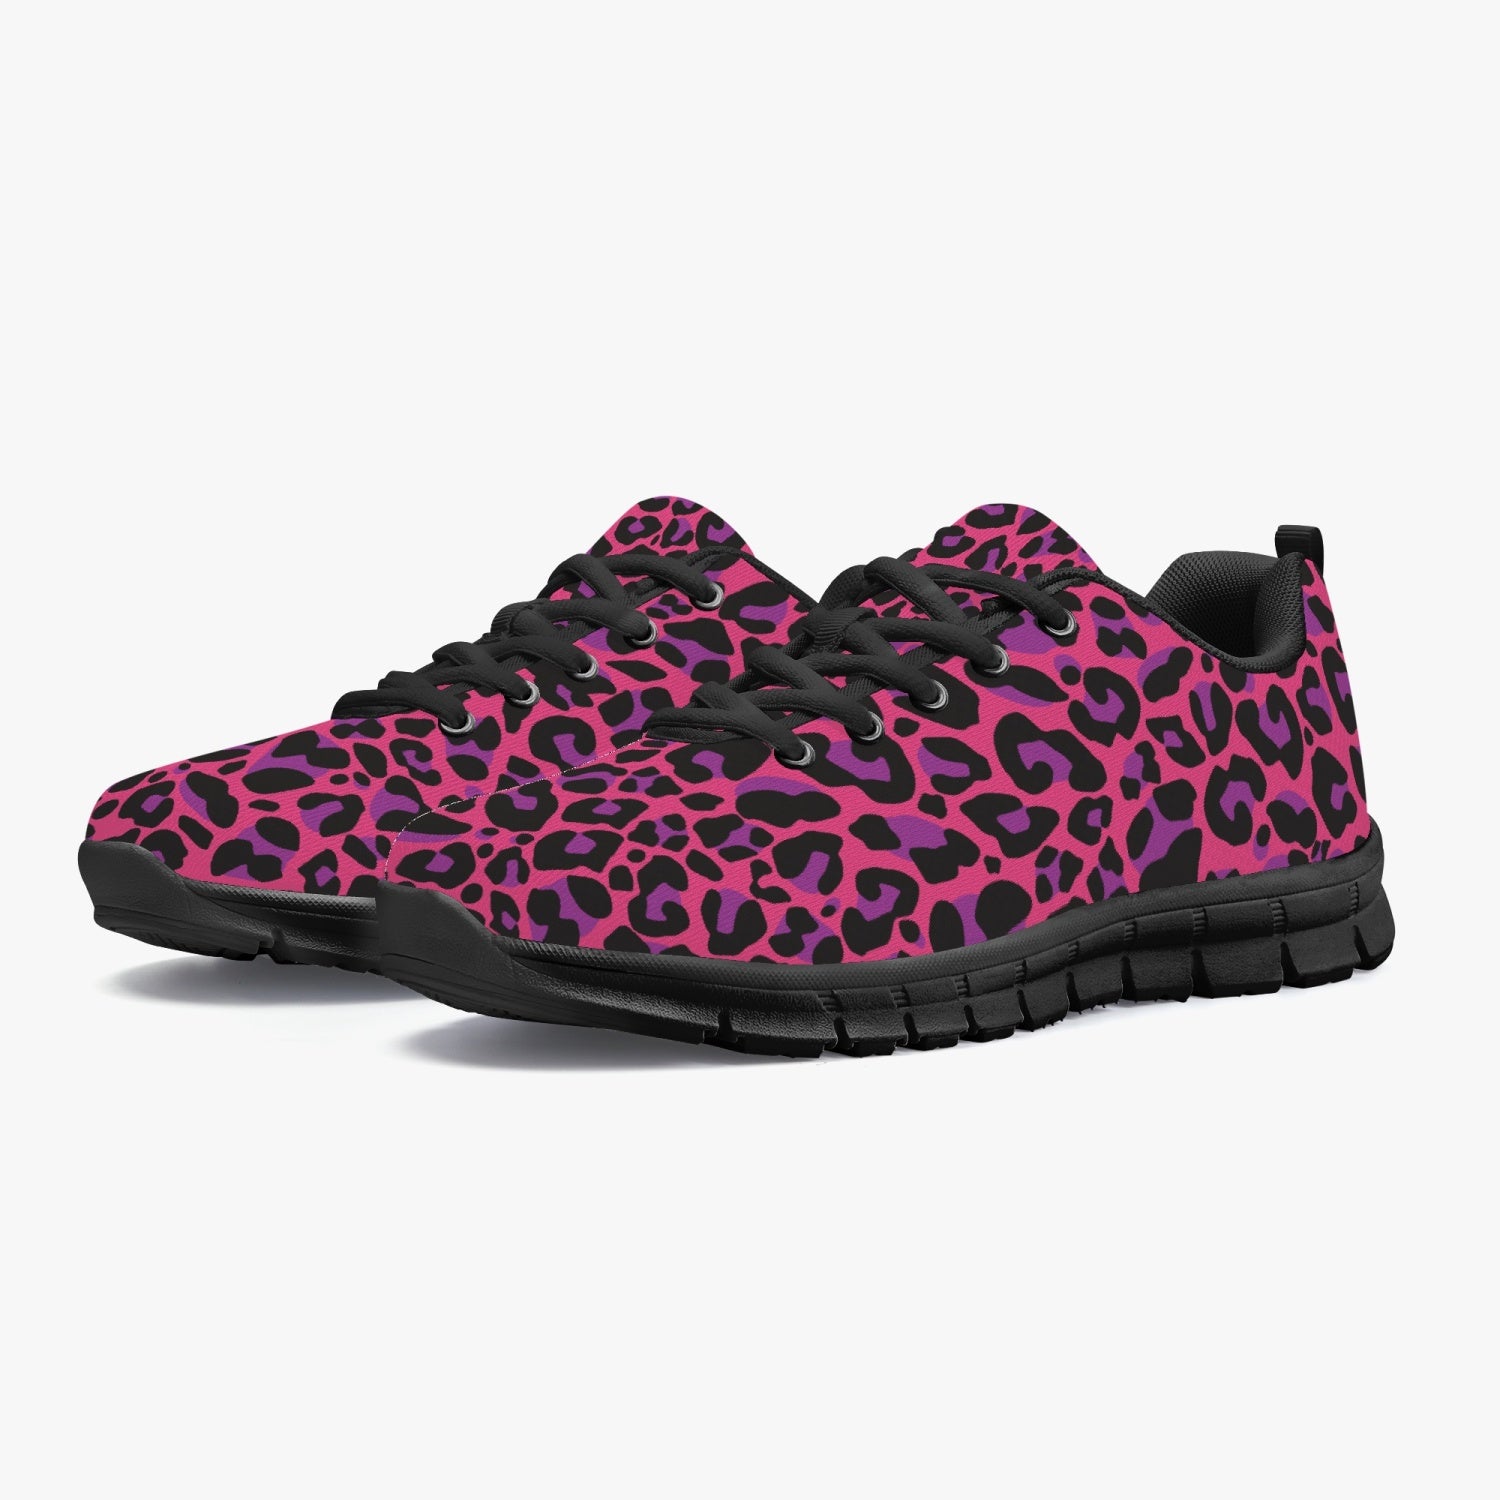 Women's Pink Wild Leopard Cheetah Full Print Gym Workout Sneakers Overview